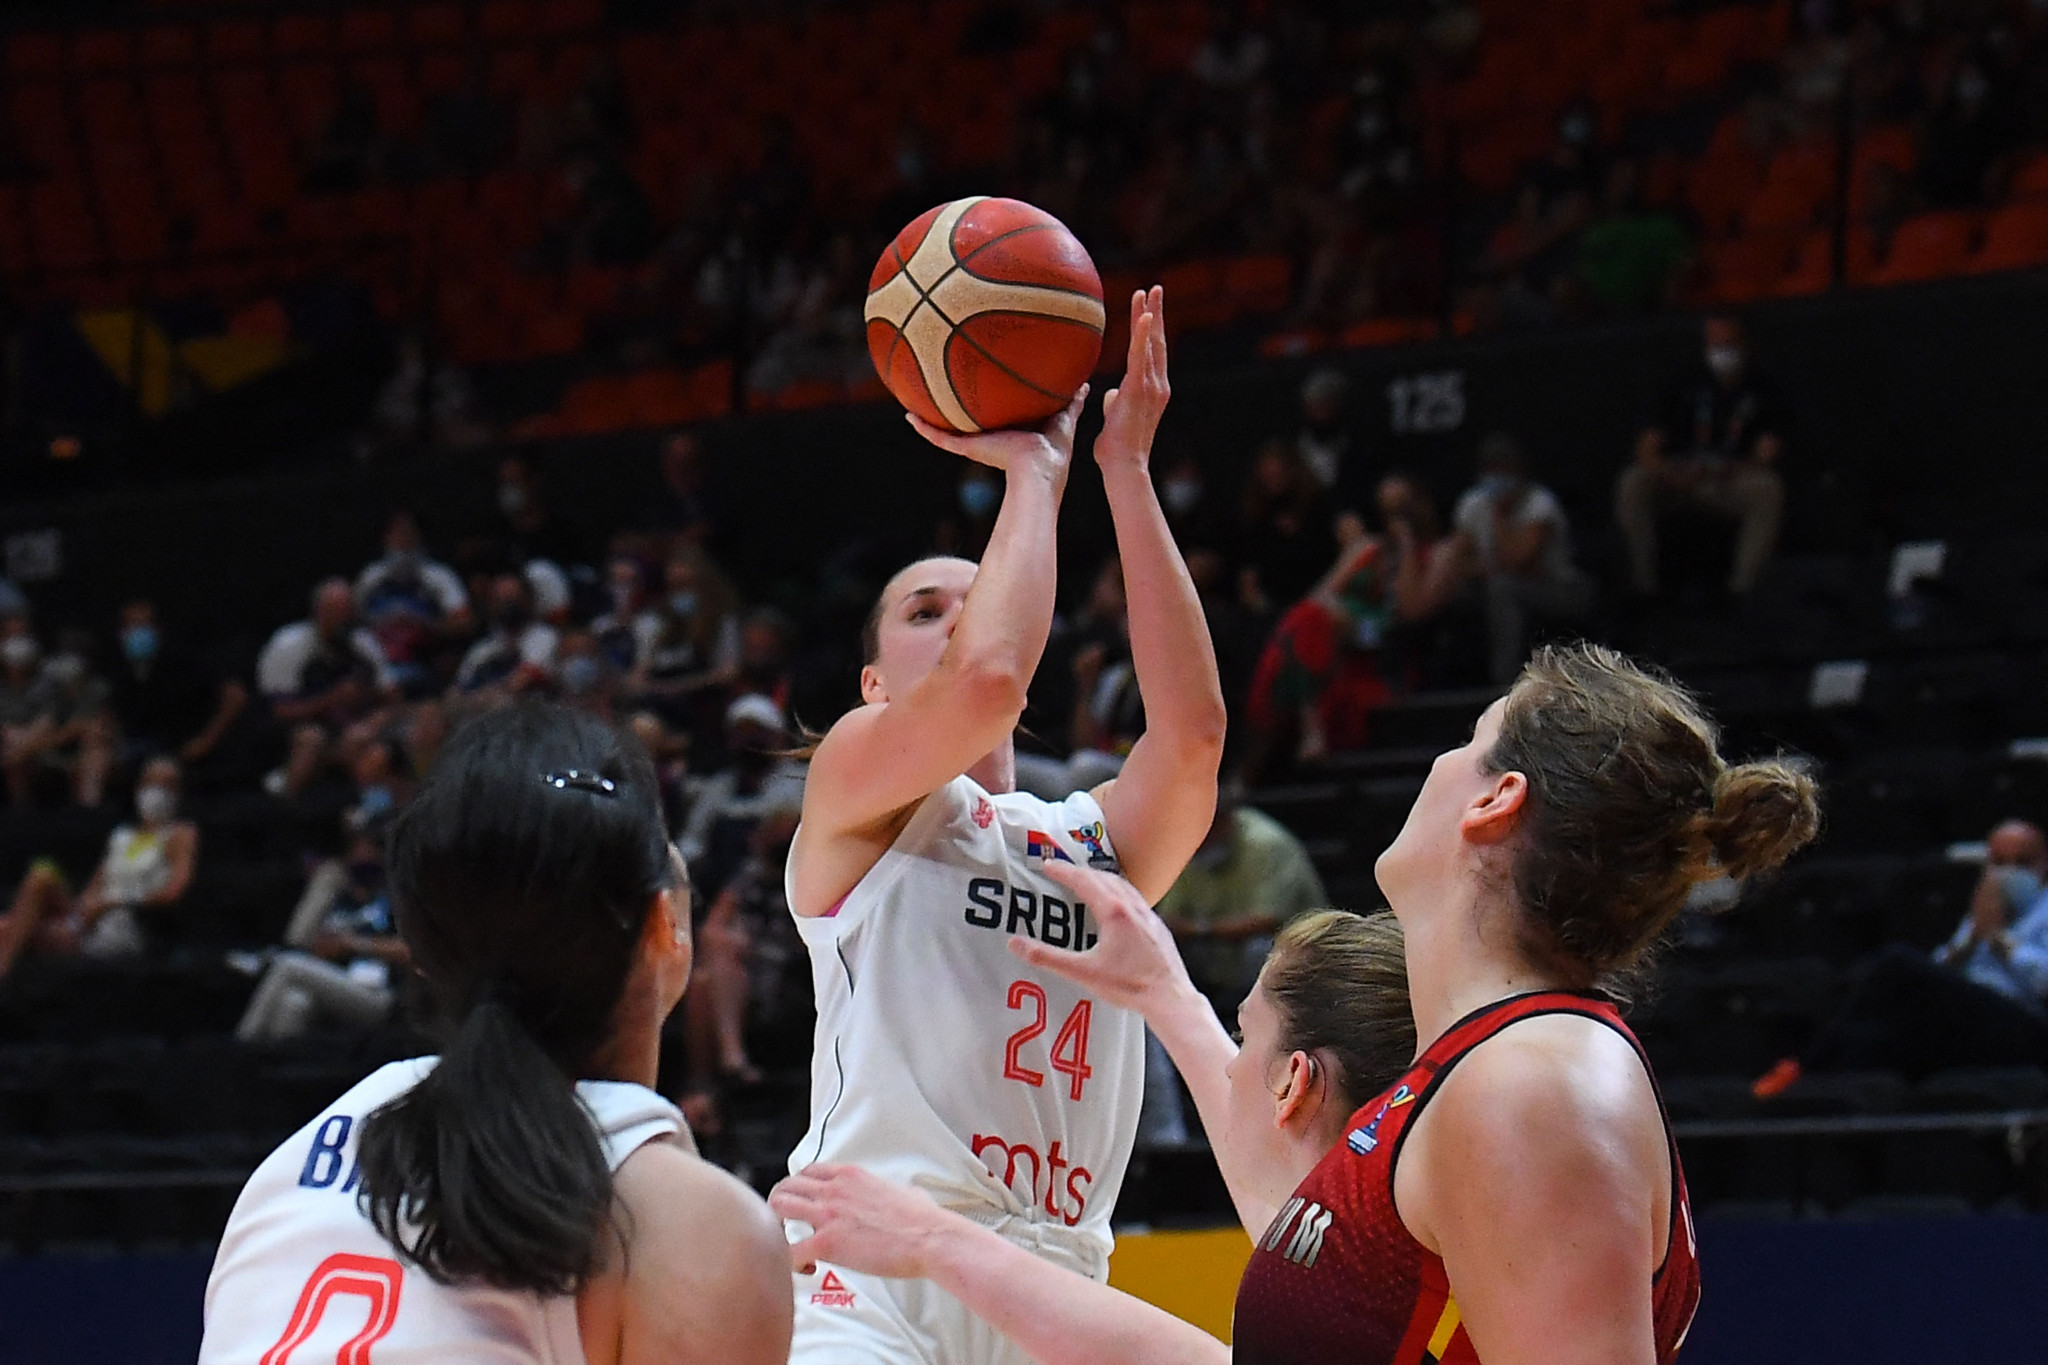 Serbia, playing in white, edged out Belgium by the narrowest of margins to reach the FIBA Women's EuroBasket final ©Getty Images